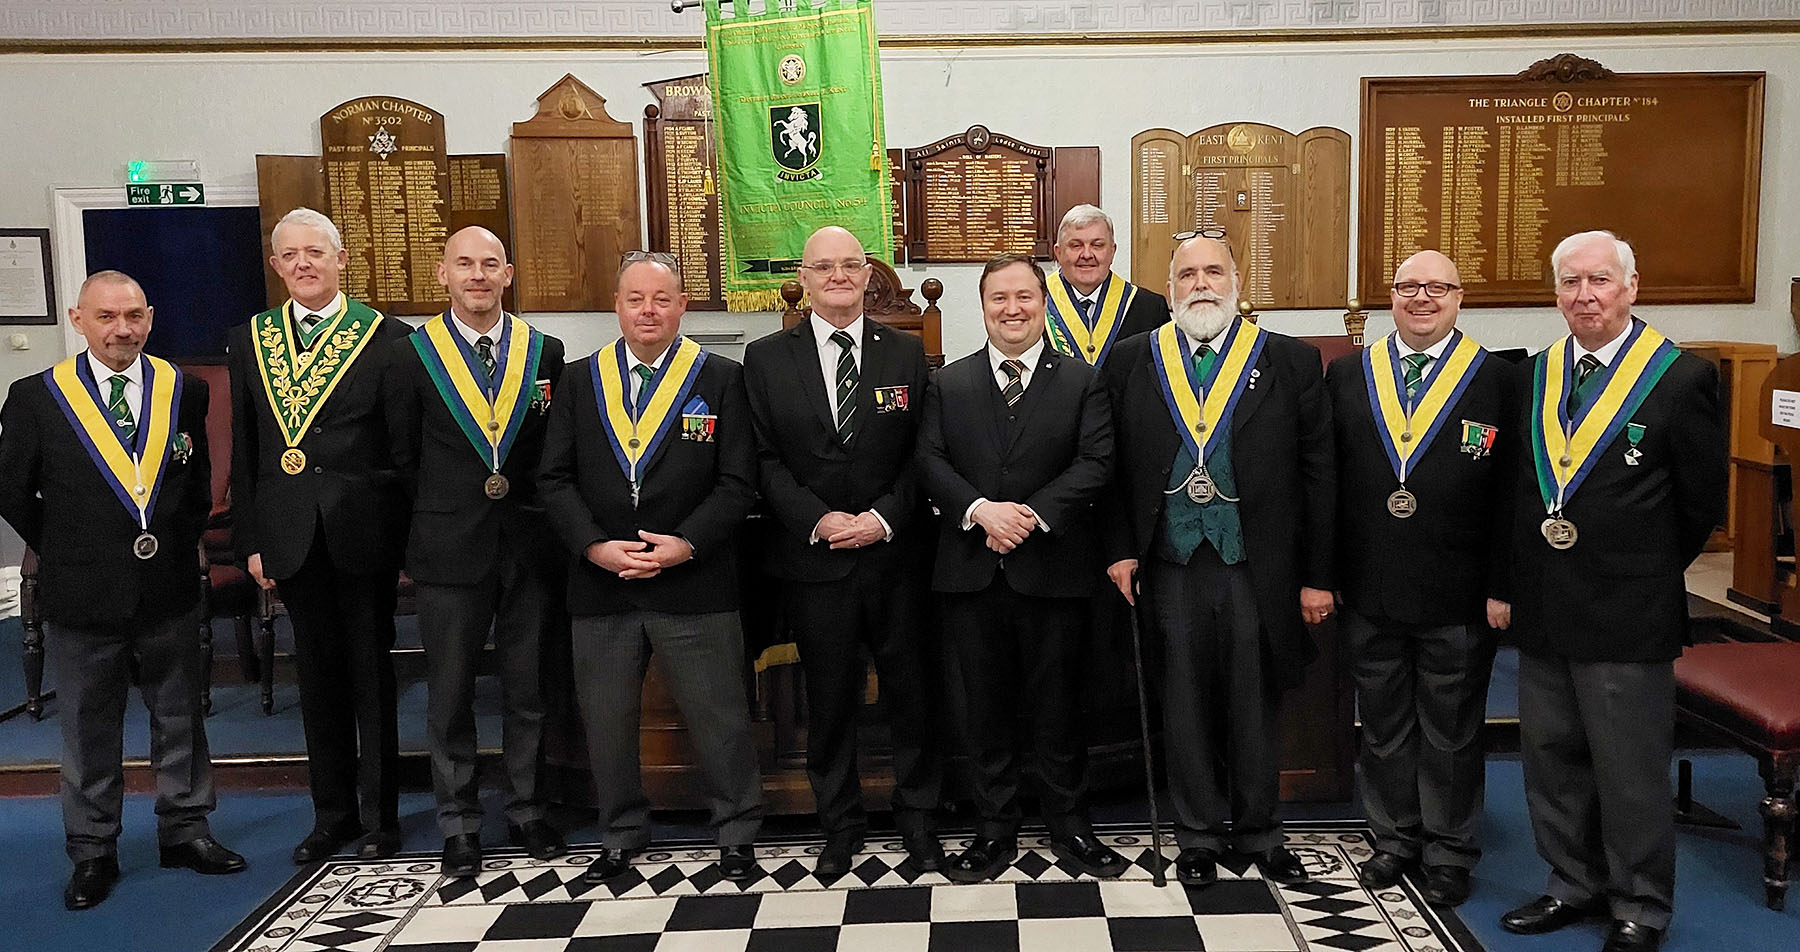 The WM W.Bro Neville Fourie with Bro. Shane Lawlor and the DGP